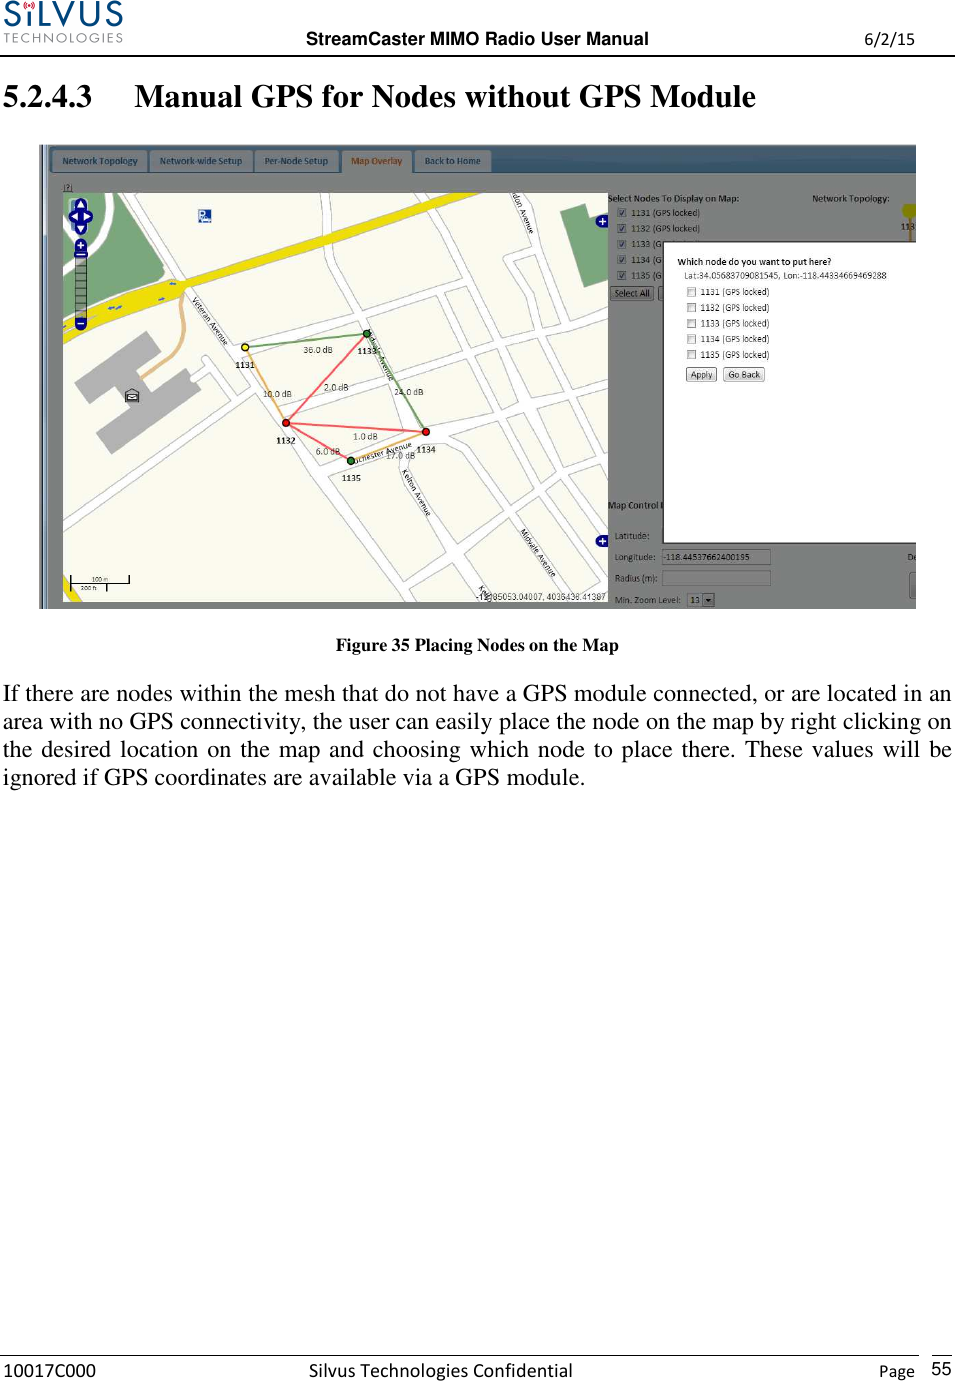  StreamCaster MIMO Radio User Manual  6/2/15 10017C000 Silvus Technologies Confidential    Page   55 5.2.4.3 Manual GPS for Nodes without GPS Module  Figure 35 Placing Nodes on the Map If there are nodes within the mesh that do not have a GPS module connected, or are located in an area with no GPS connectivity, the user can easily place the node on the map by right clicking on the desired location on the map and choosing which node to place there. These values will be ignored if GPS coordinates are available via a GPS module.            